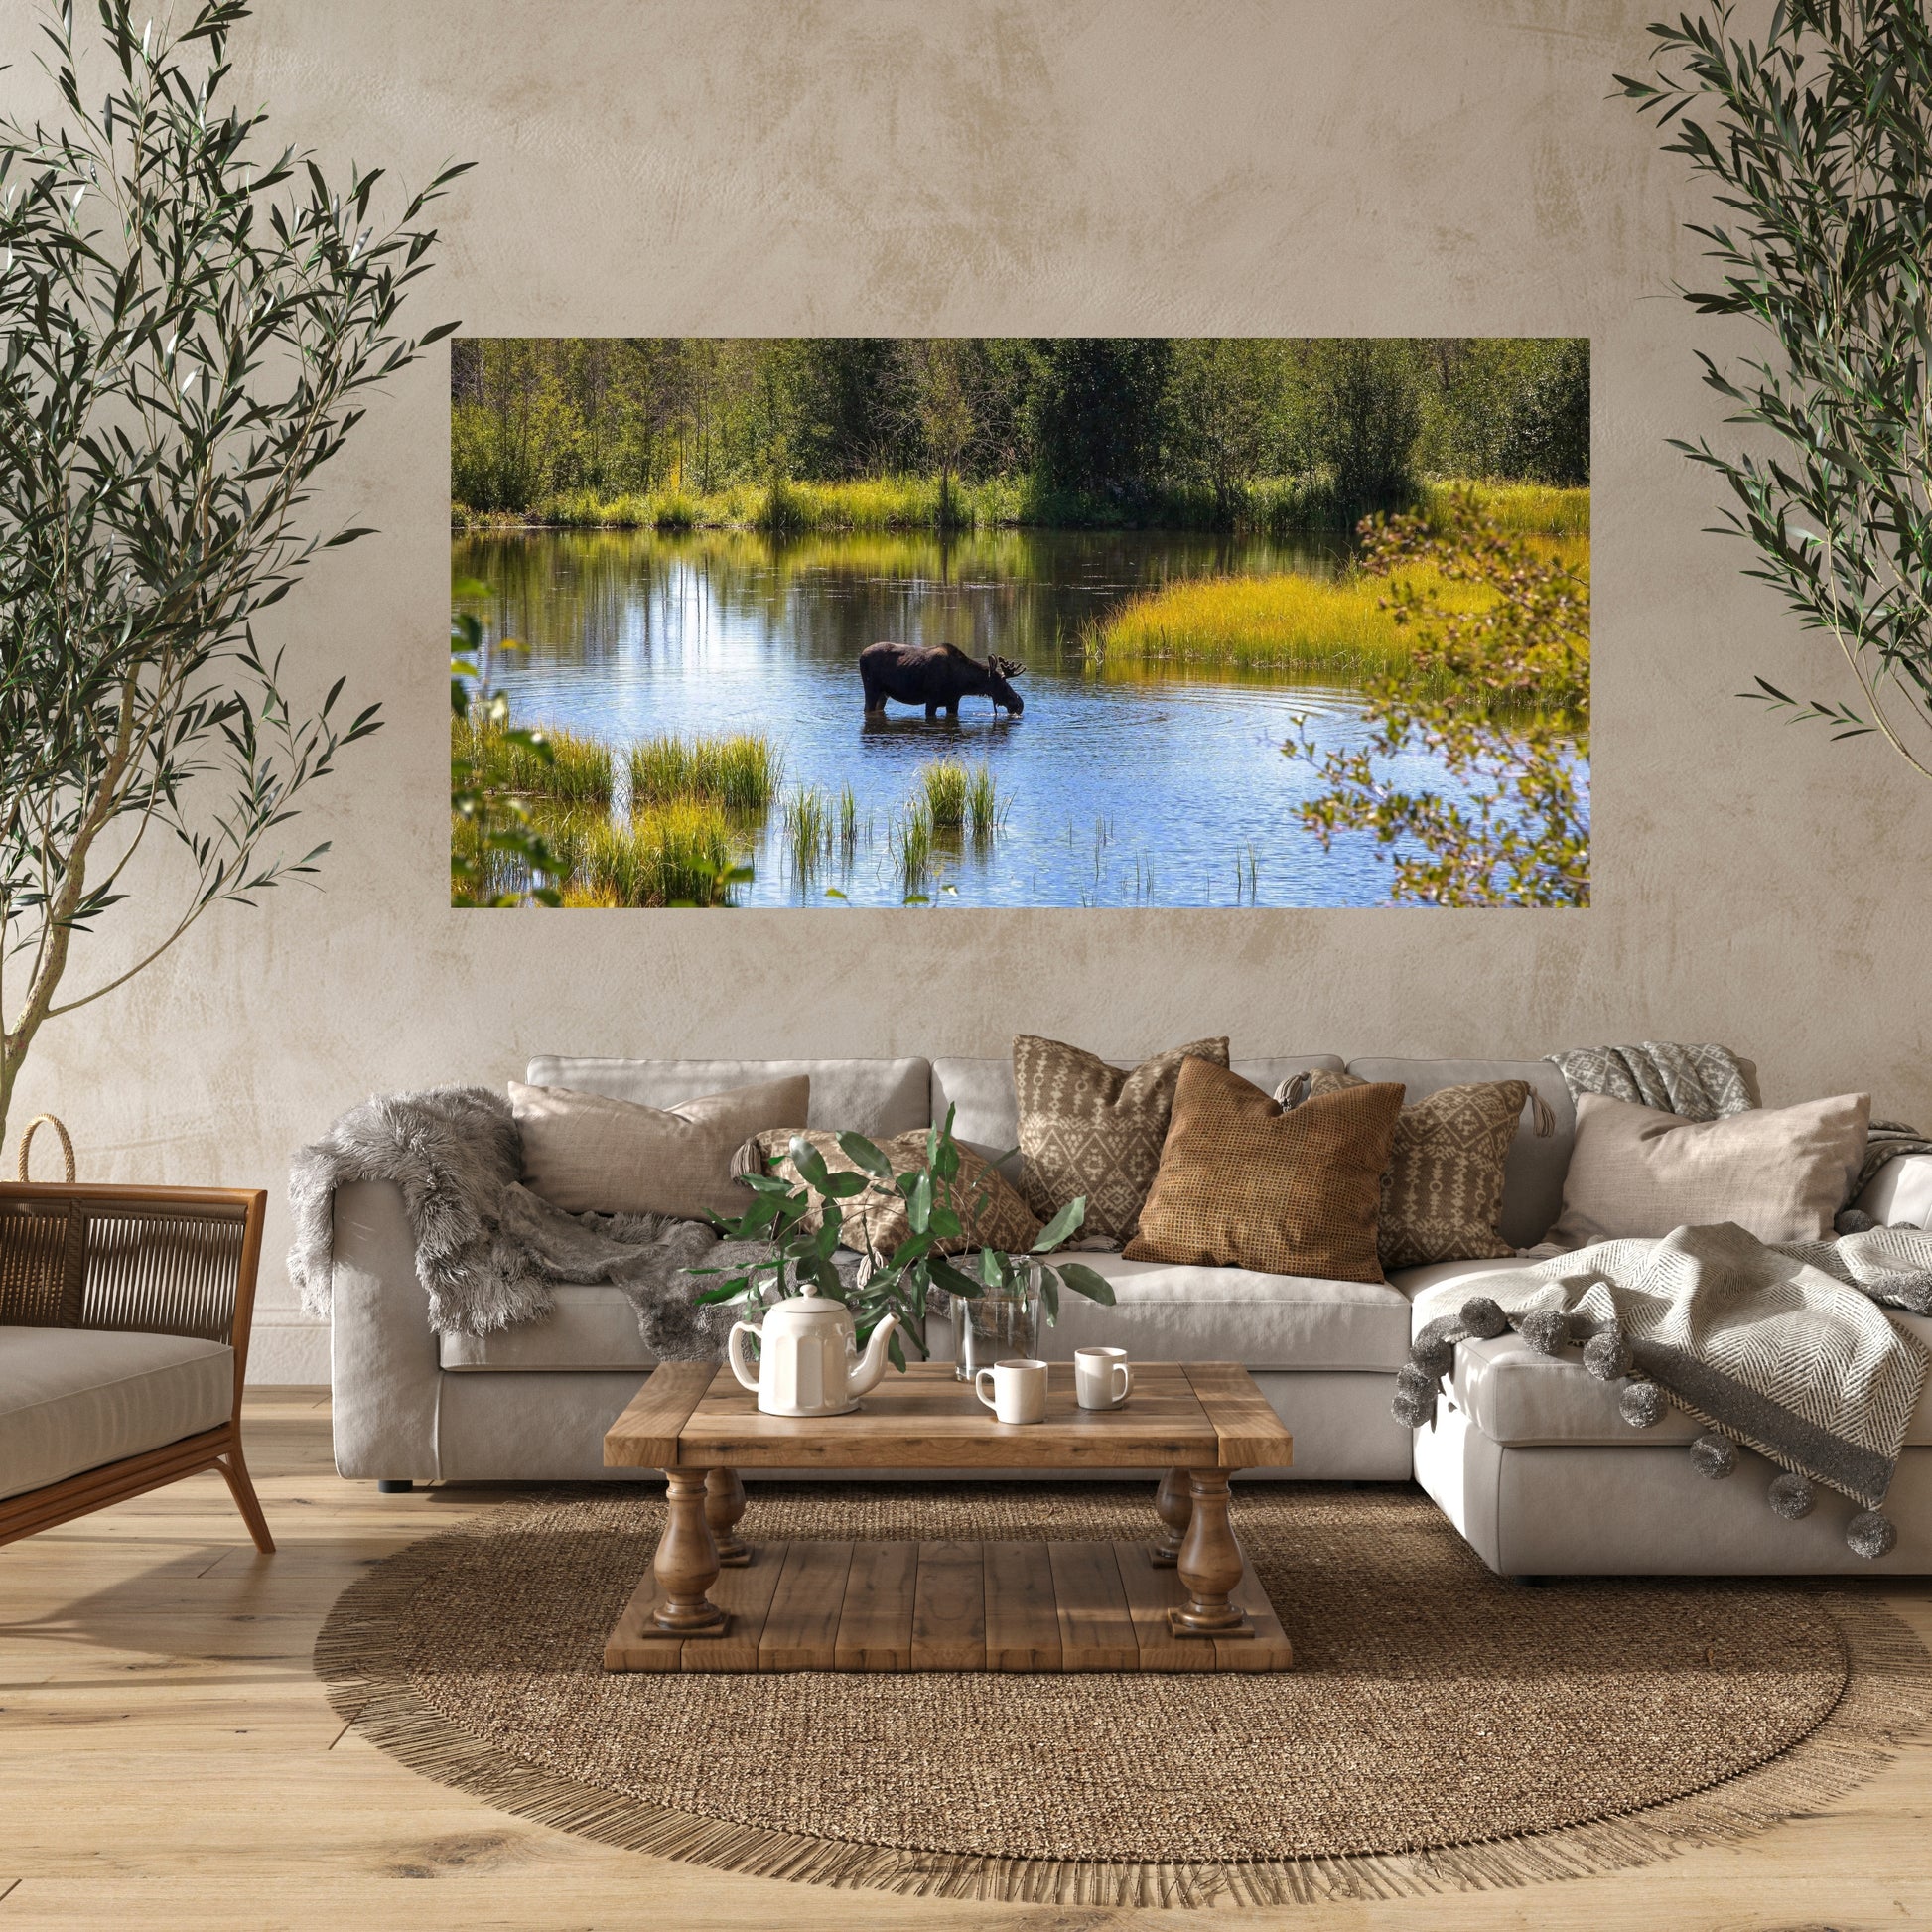 fall themed large art of moose drinking water hanging above southwest furniture themes in tan and brown